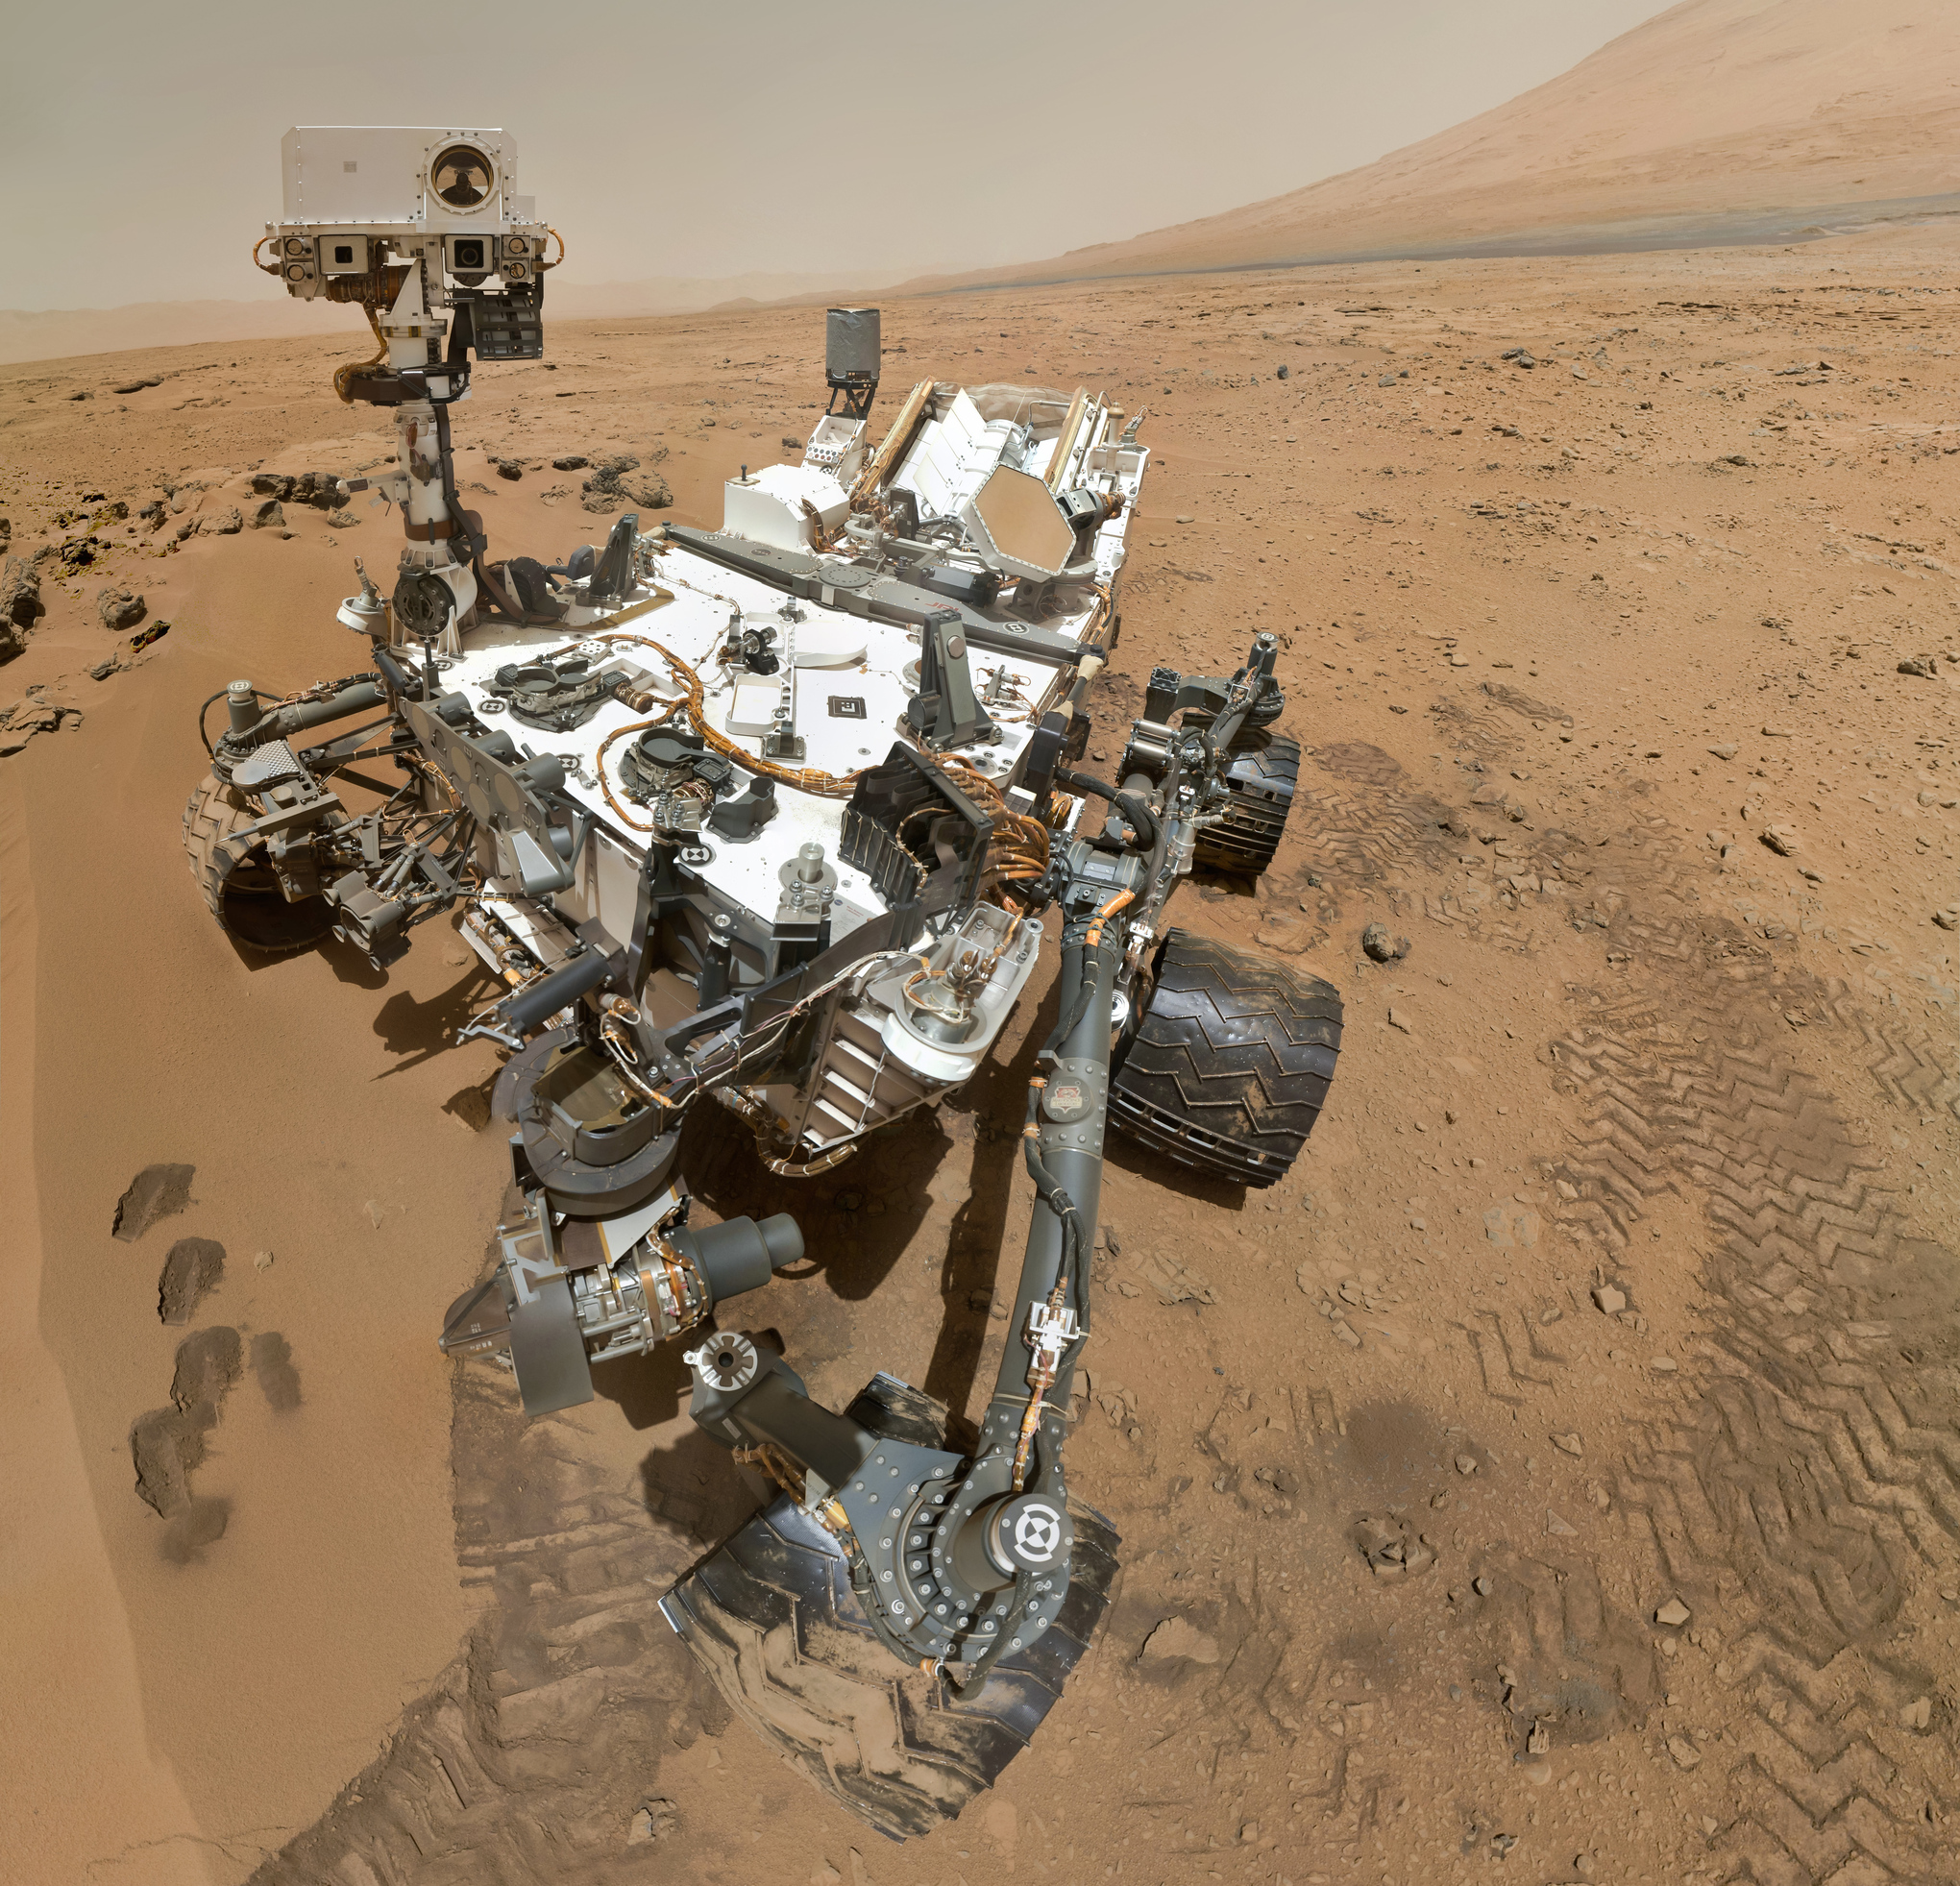 Pia16239_high-resolution_self-portrait_by_curiosity_rover_arm_camera